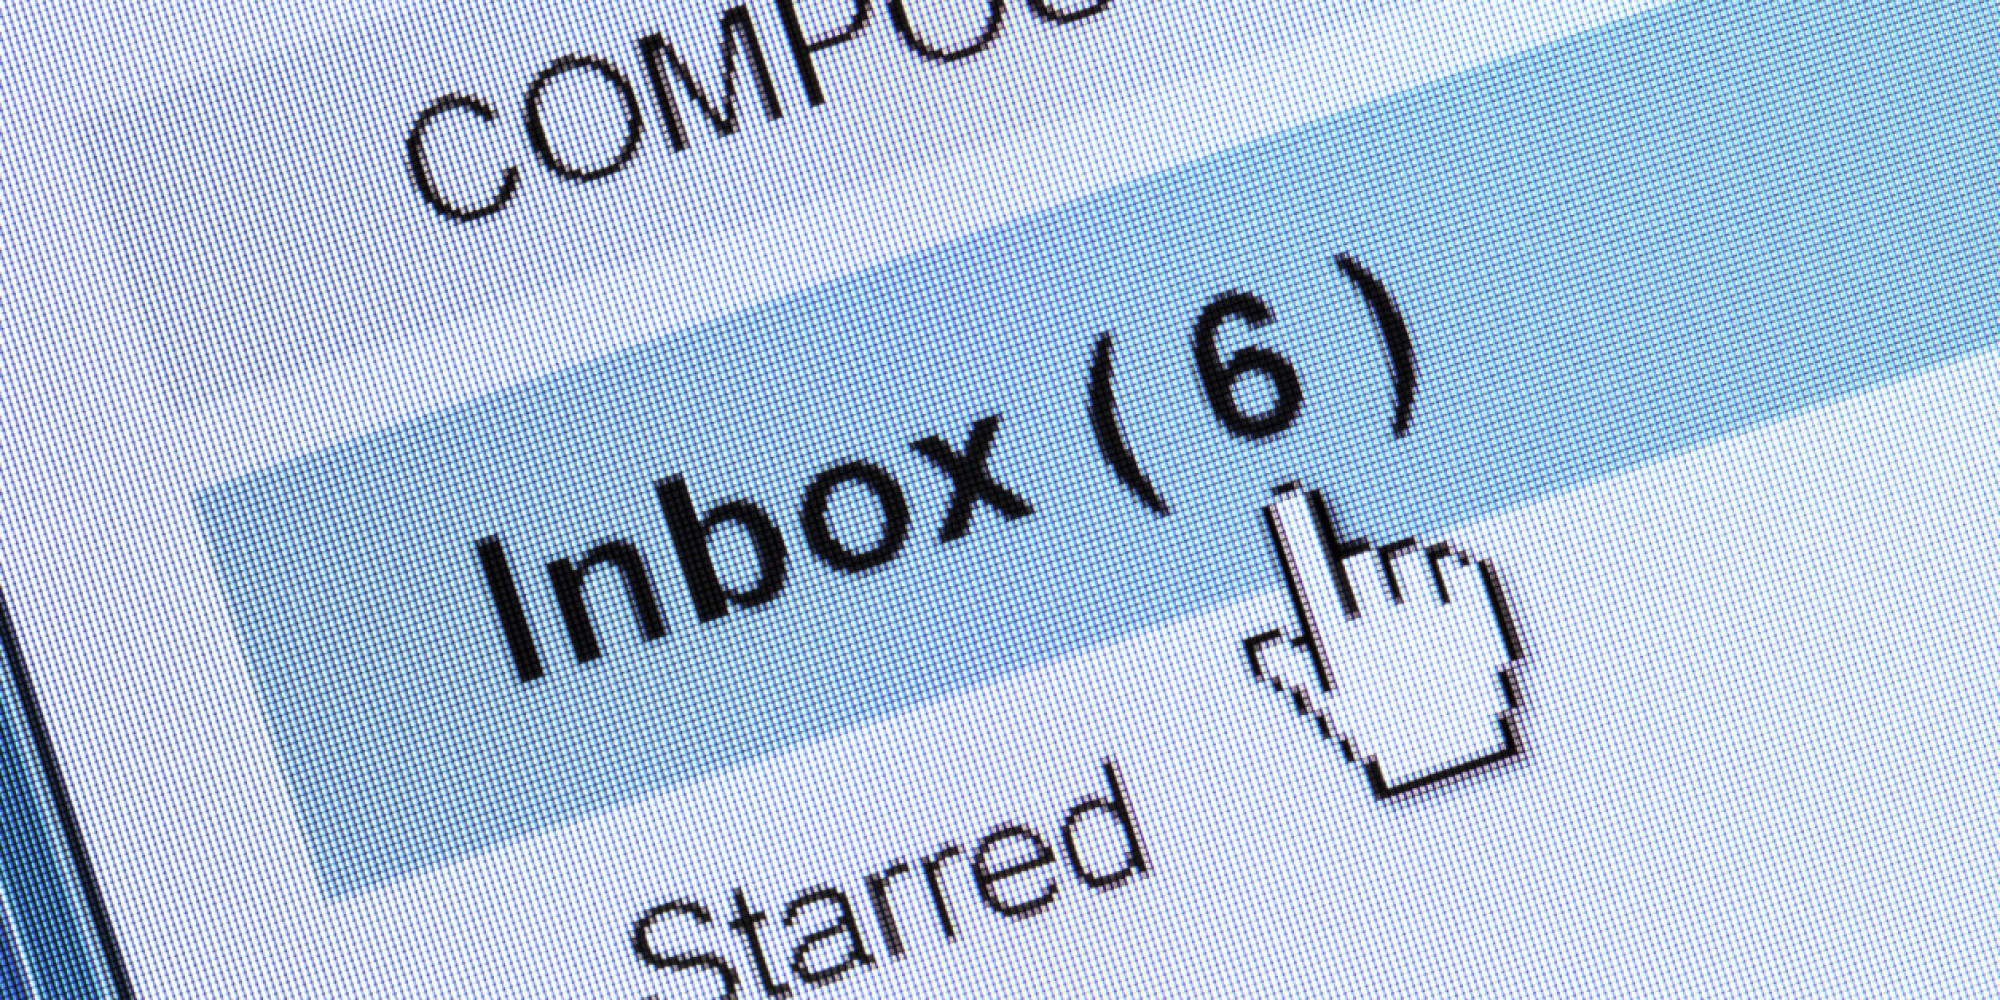 Judge gives the go ahead to search entire gmail account